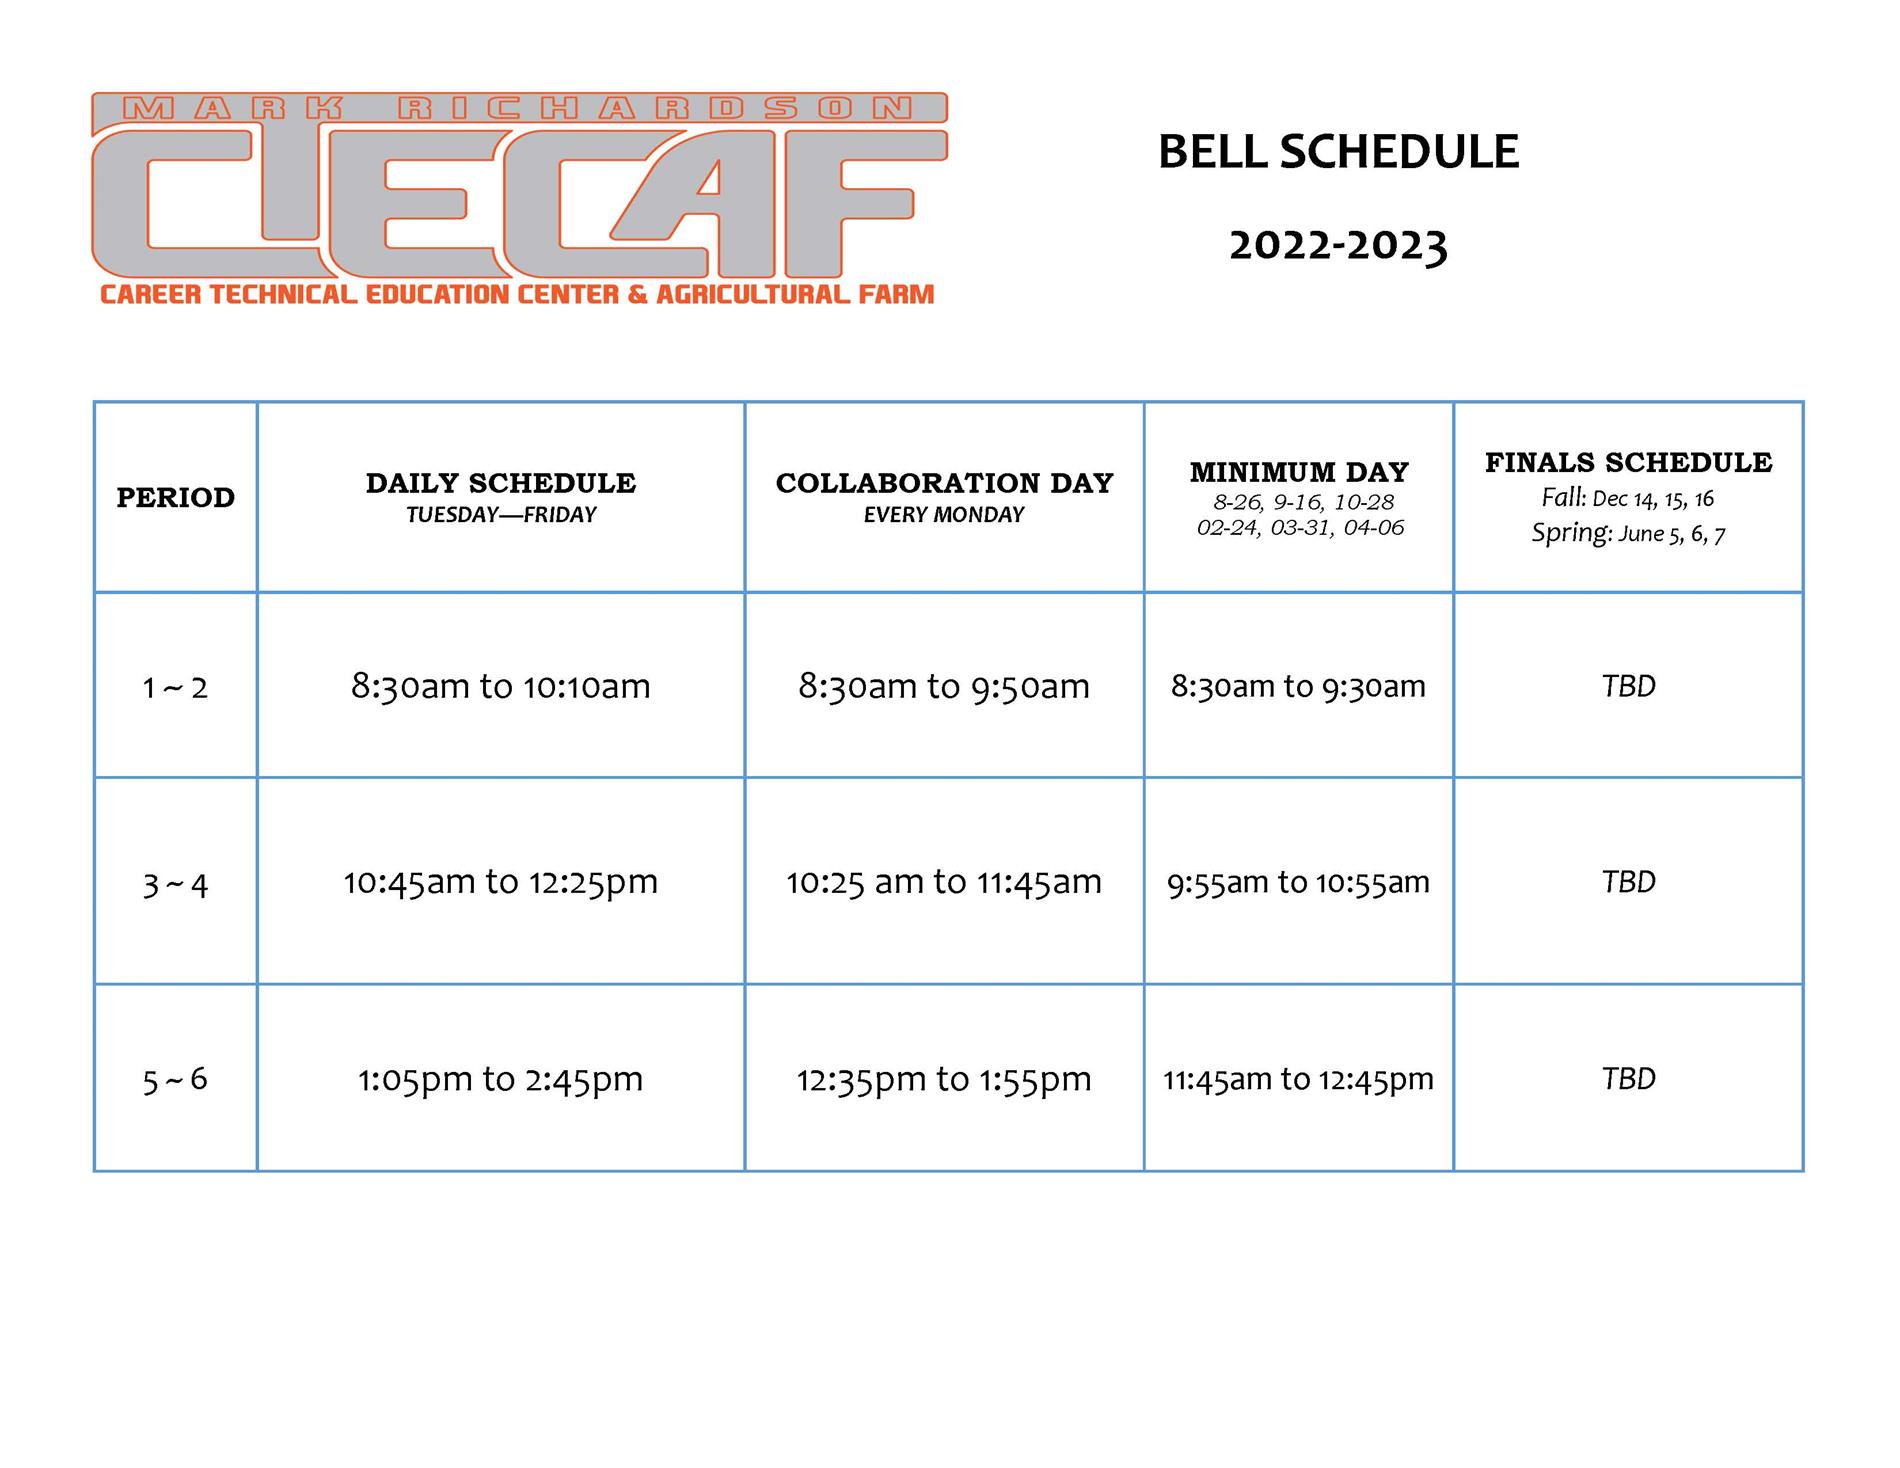 Bell Sched 22-23